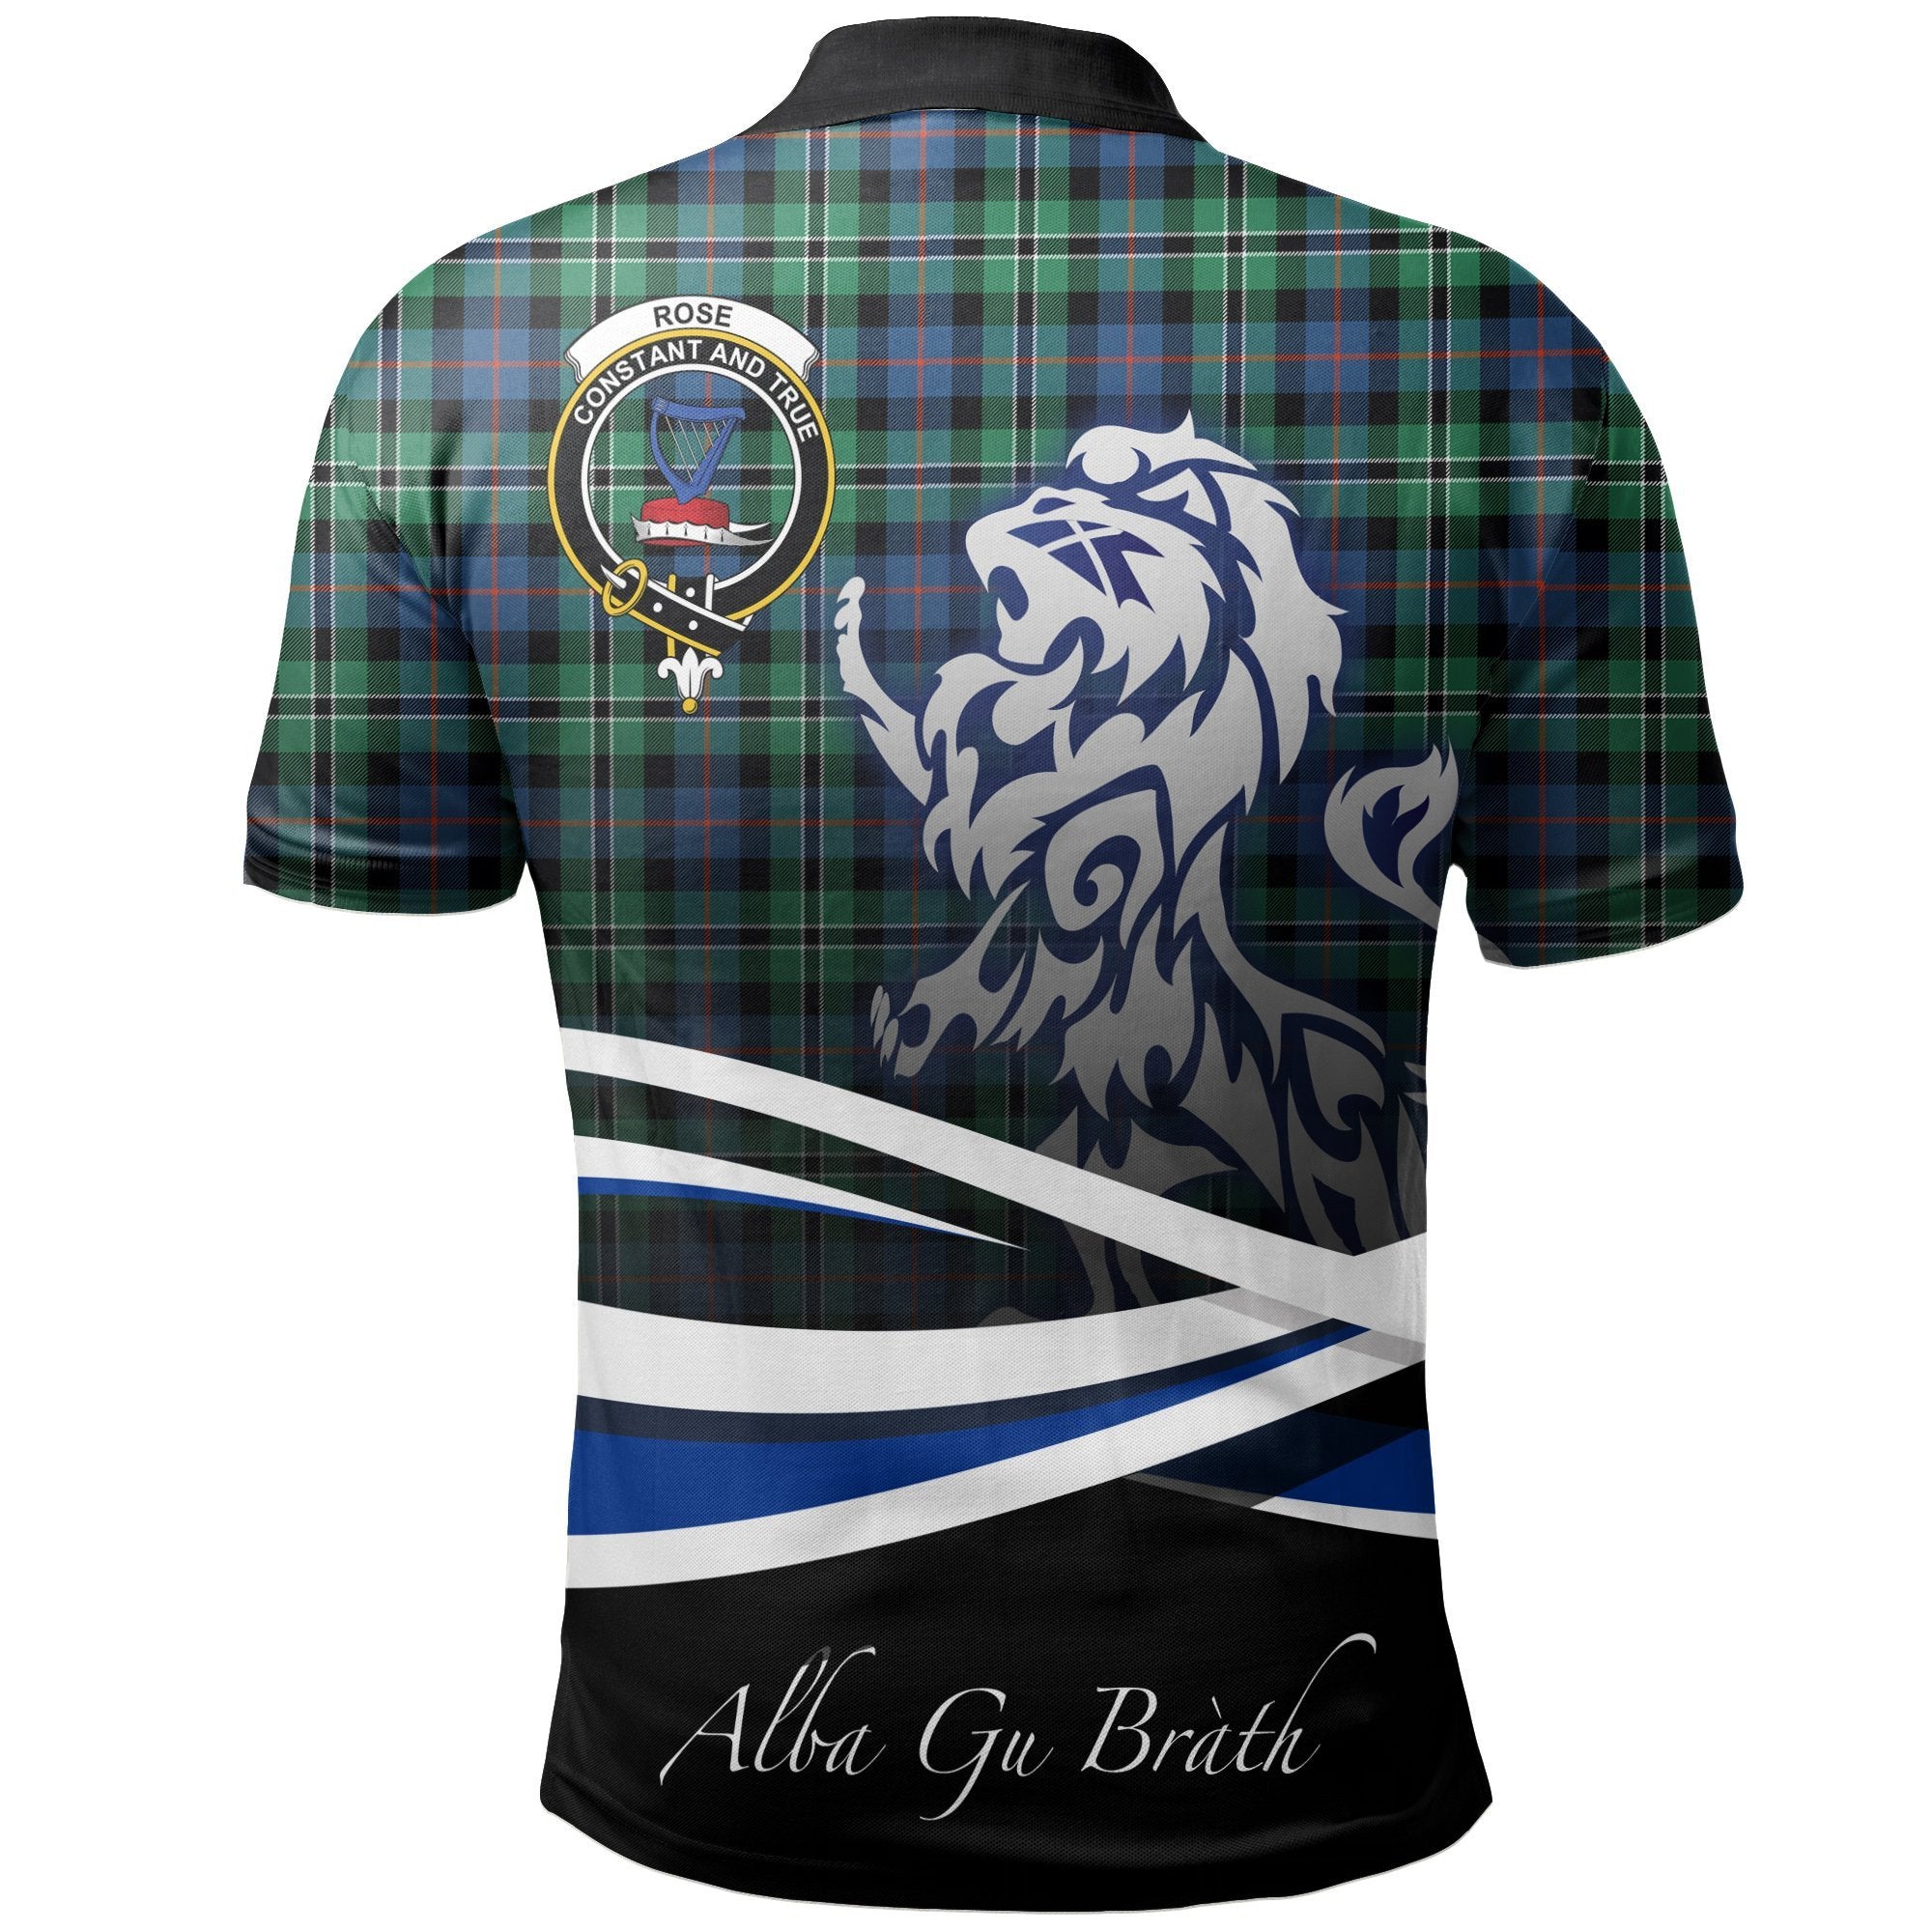 Rose Hunting Ancient Clan Polo Shirt, Scottish Tartan Rose Hunting Ancient Clans Polo Shirt Crest Lion Style